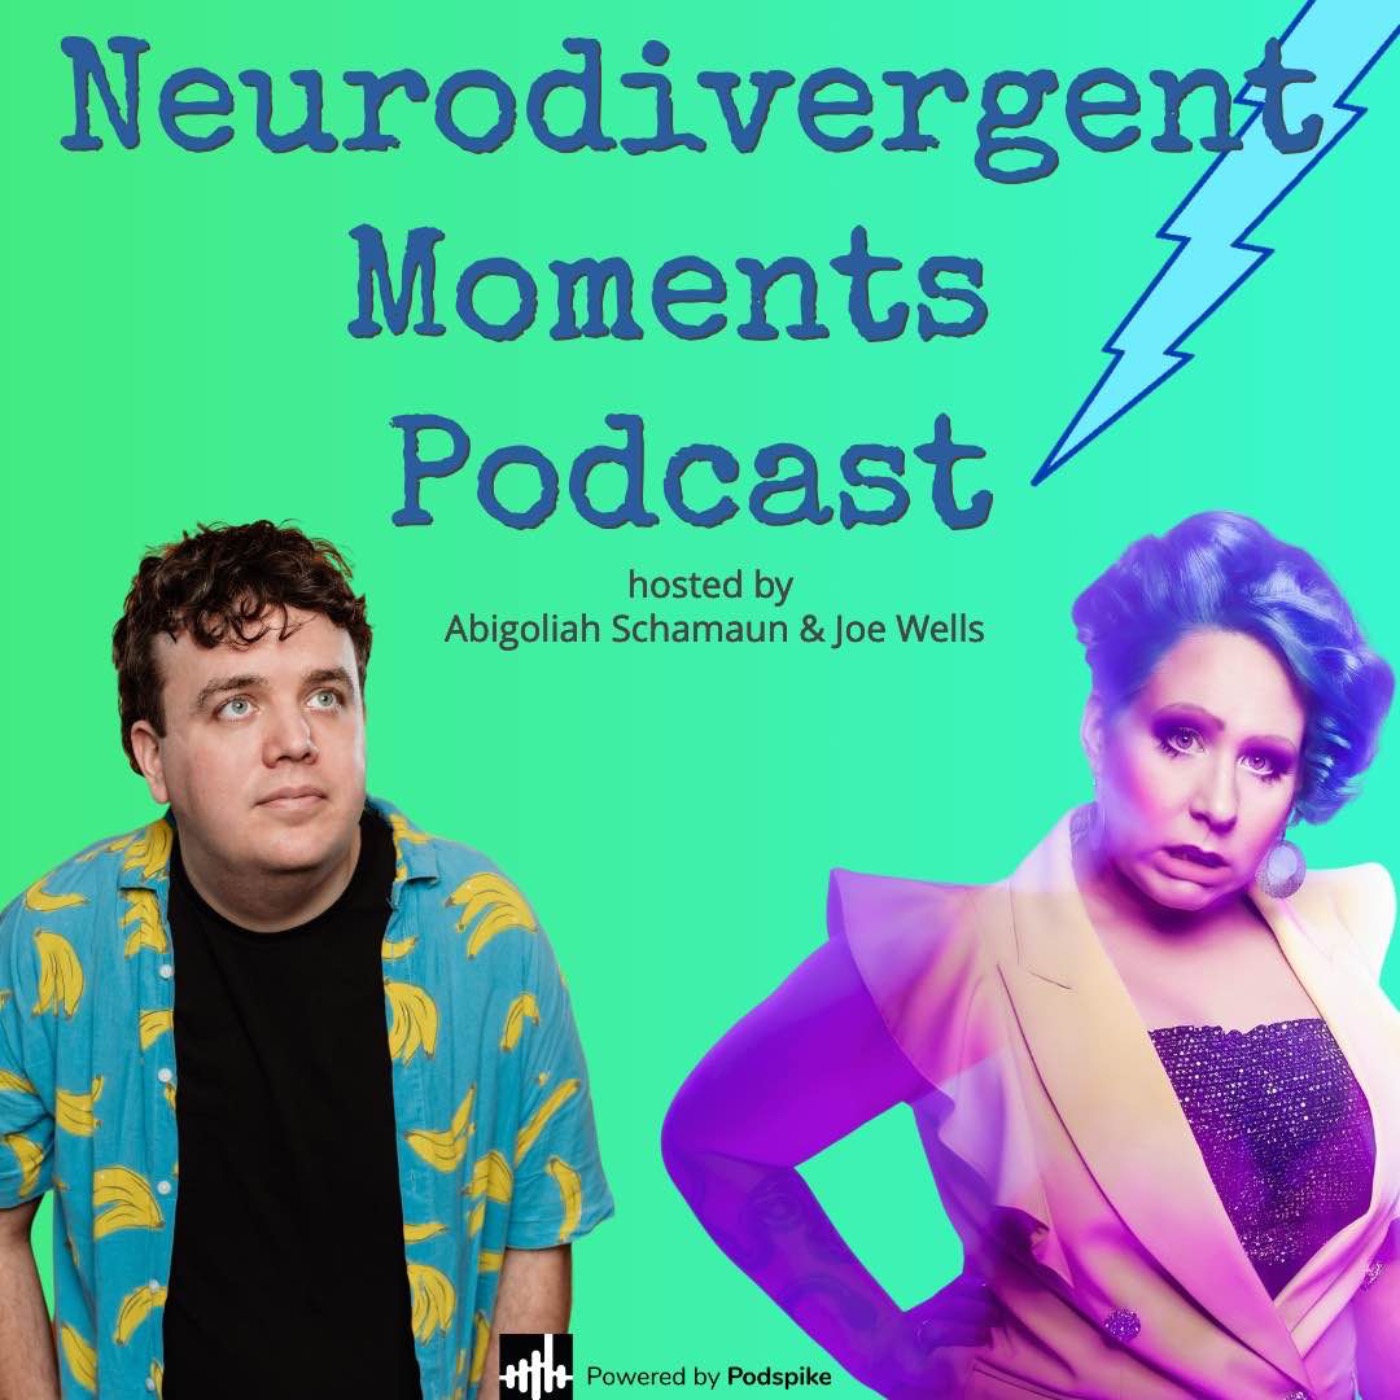 Neurodivergent Moments! Coming 29th of April!